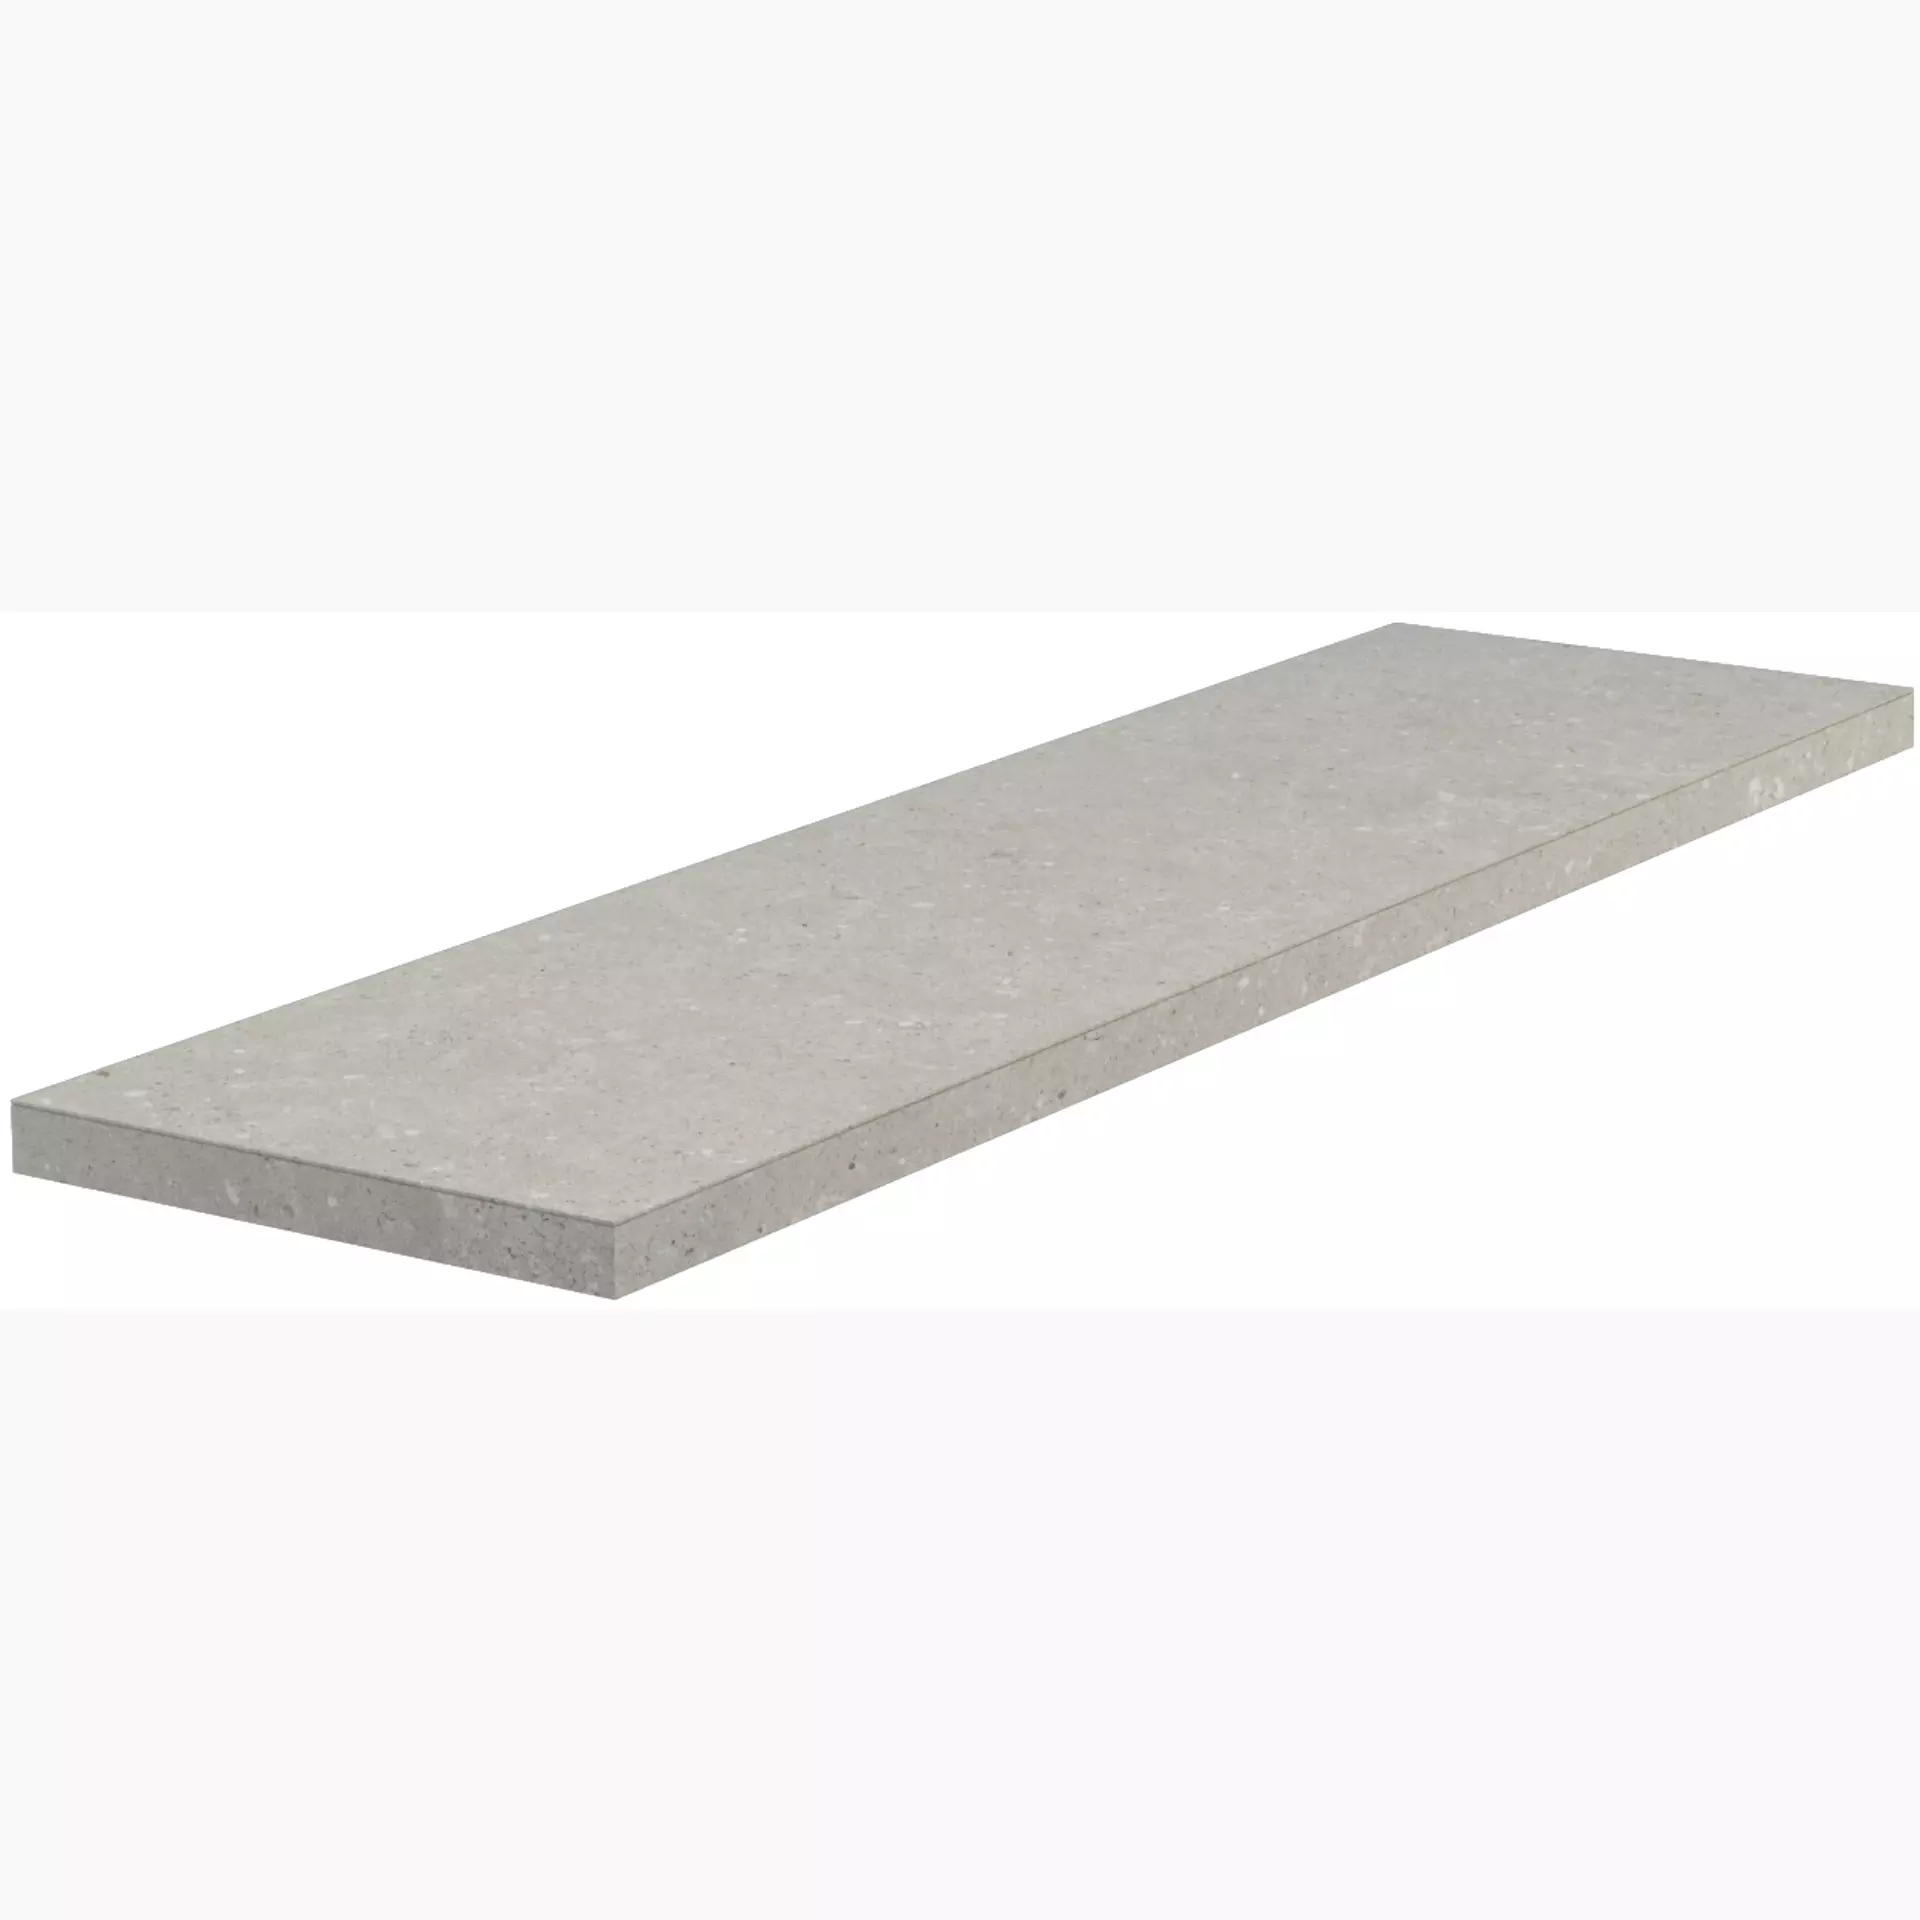 Del Conca Hwd Wild Grey Hwd05 Naturale Corner plate Step Left G3WD05RGS12 33x120cm rectified 8,5mm